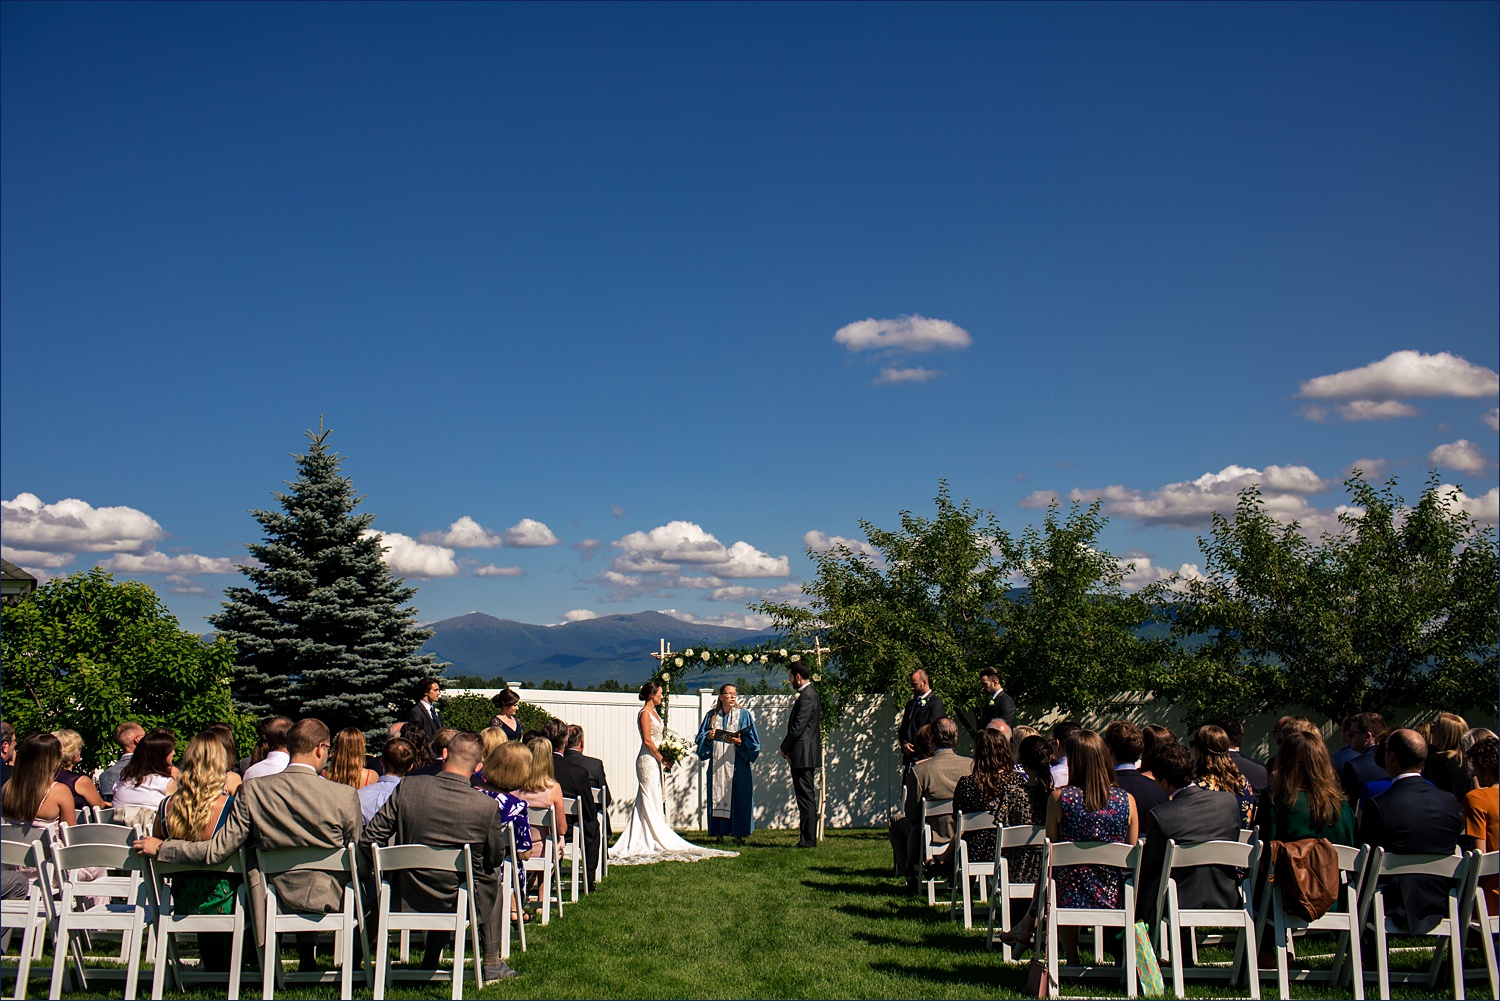 The wedding ceremony of the garden at Mountain View Grand Resort in New Hampshire overlooking the mountains